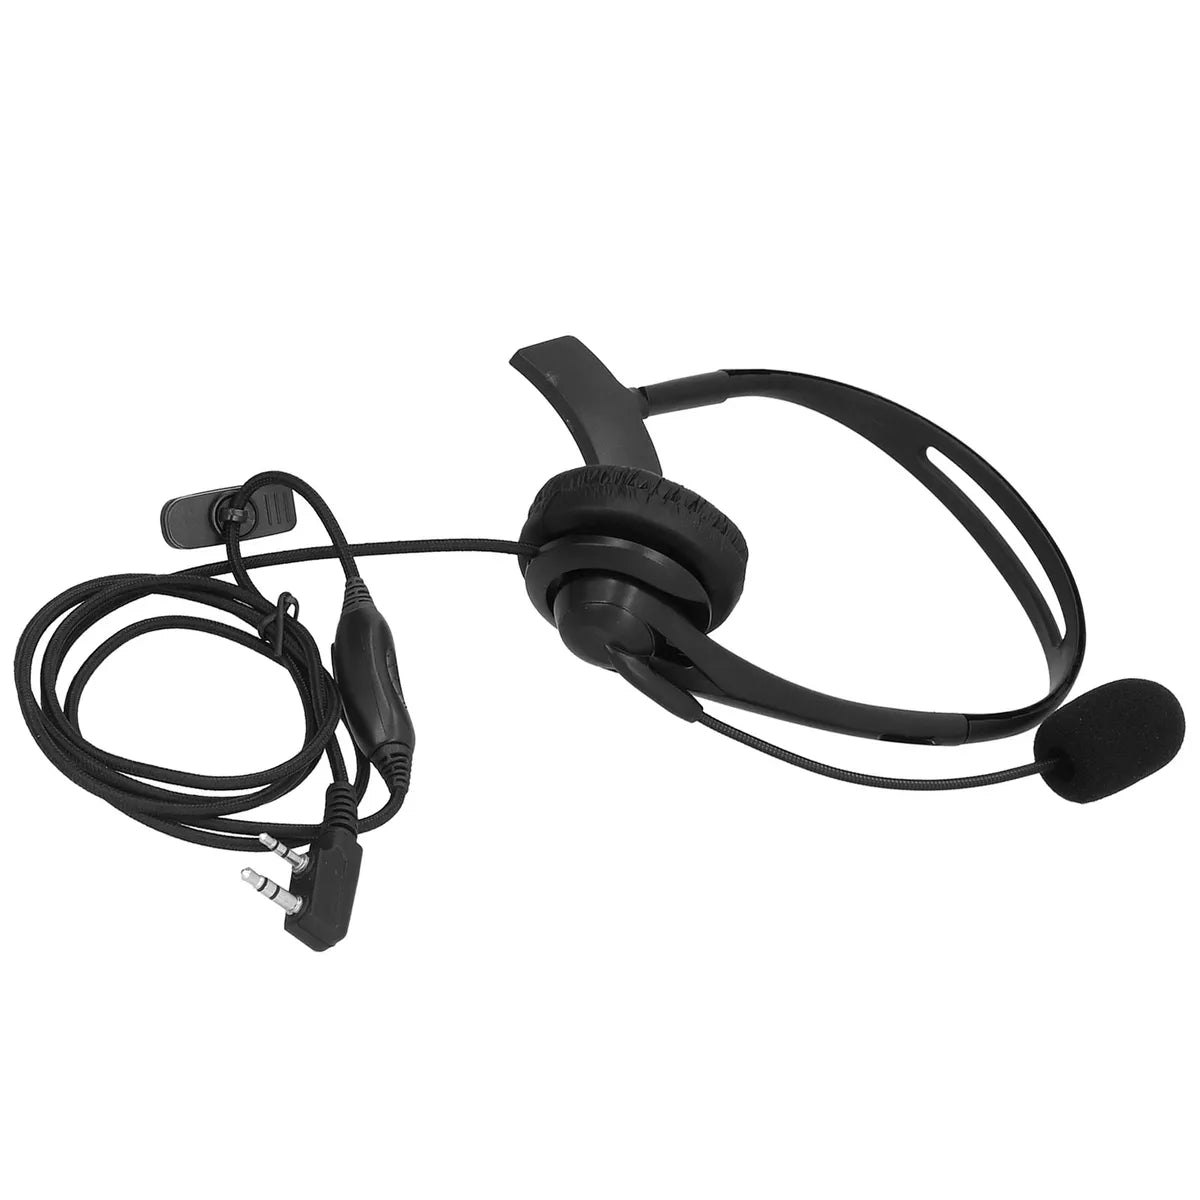 KHead Walkie Talkie Headset With Microphone For Function Single Side